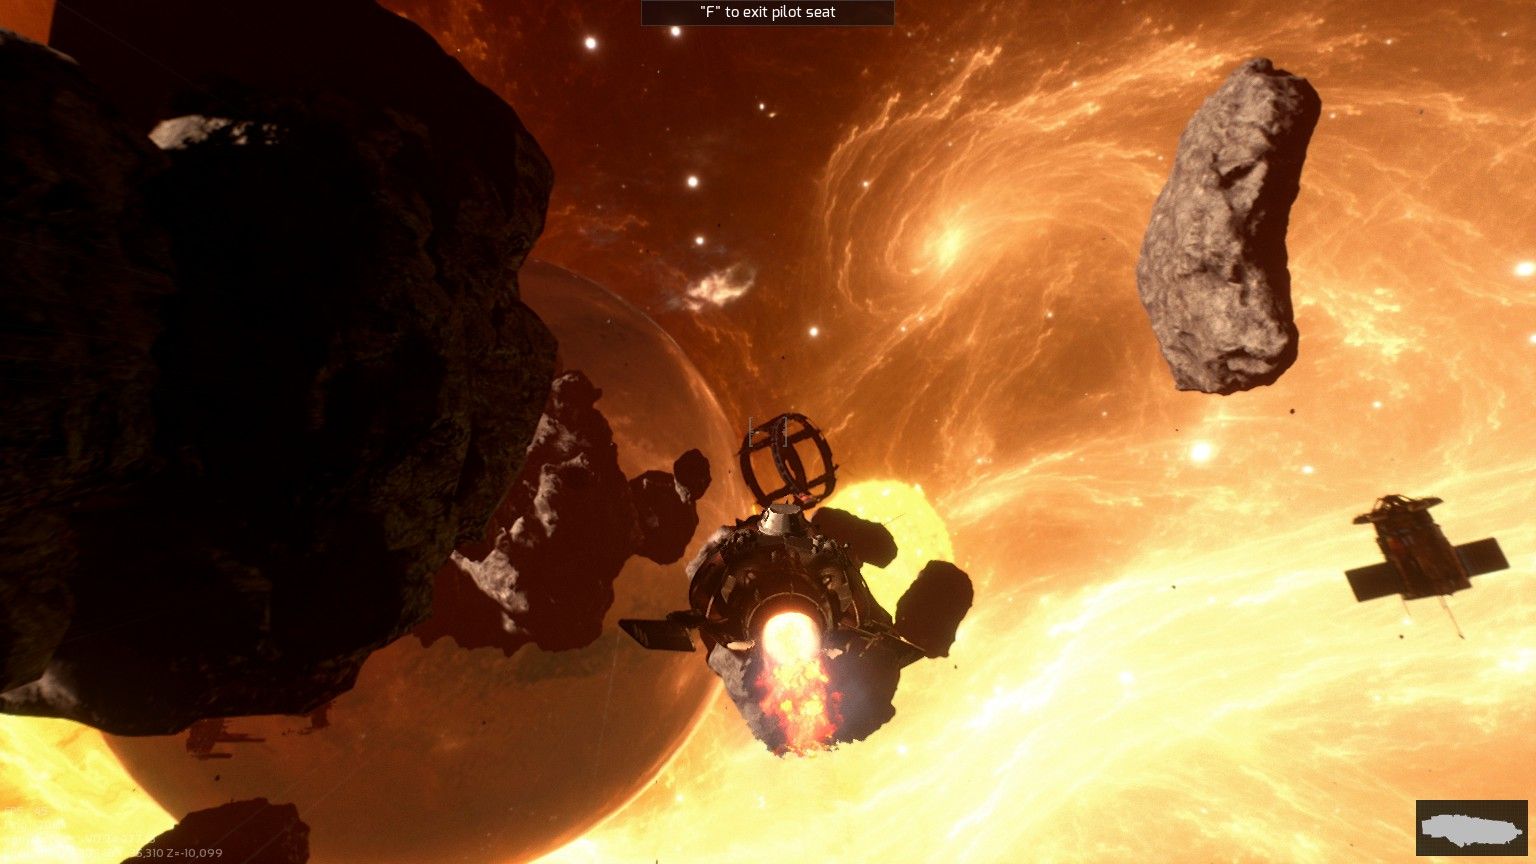 Screenshot of the game. Ships fly through an asteroid field bathed in orange light.